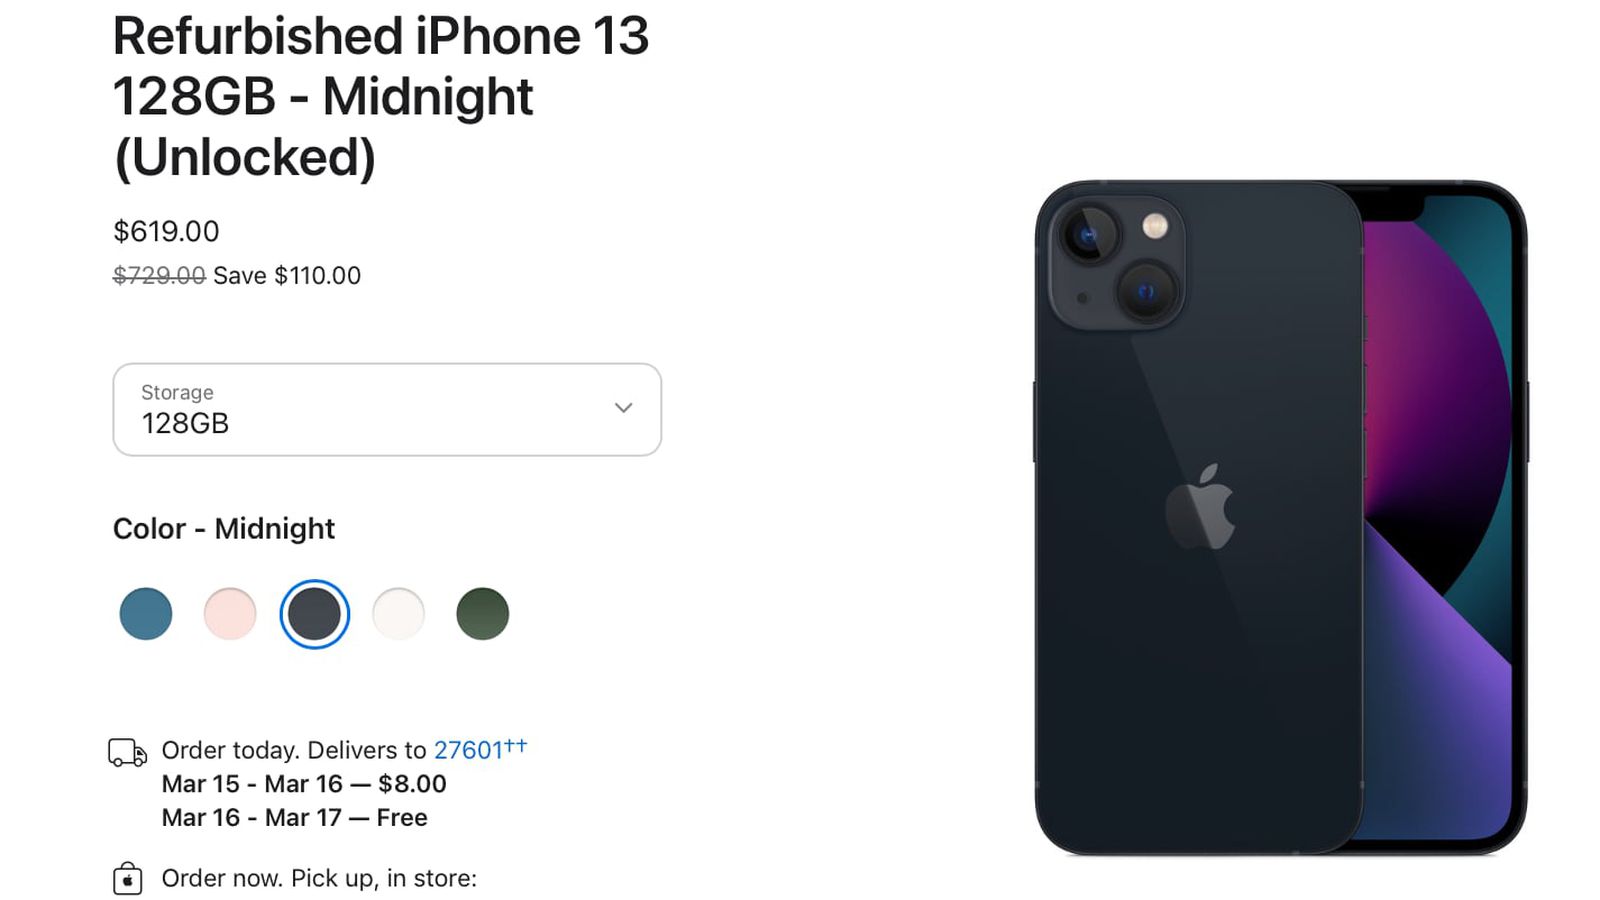 Refurbished iPhone 13 Models Now Available From Apple's U.S. Store - macrumors.com